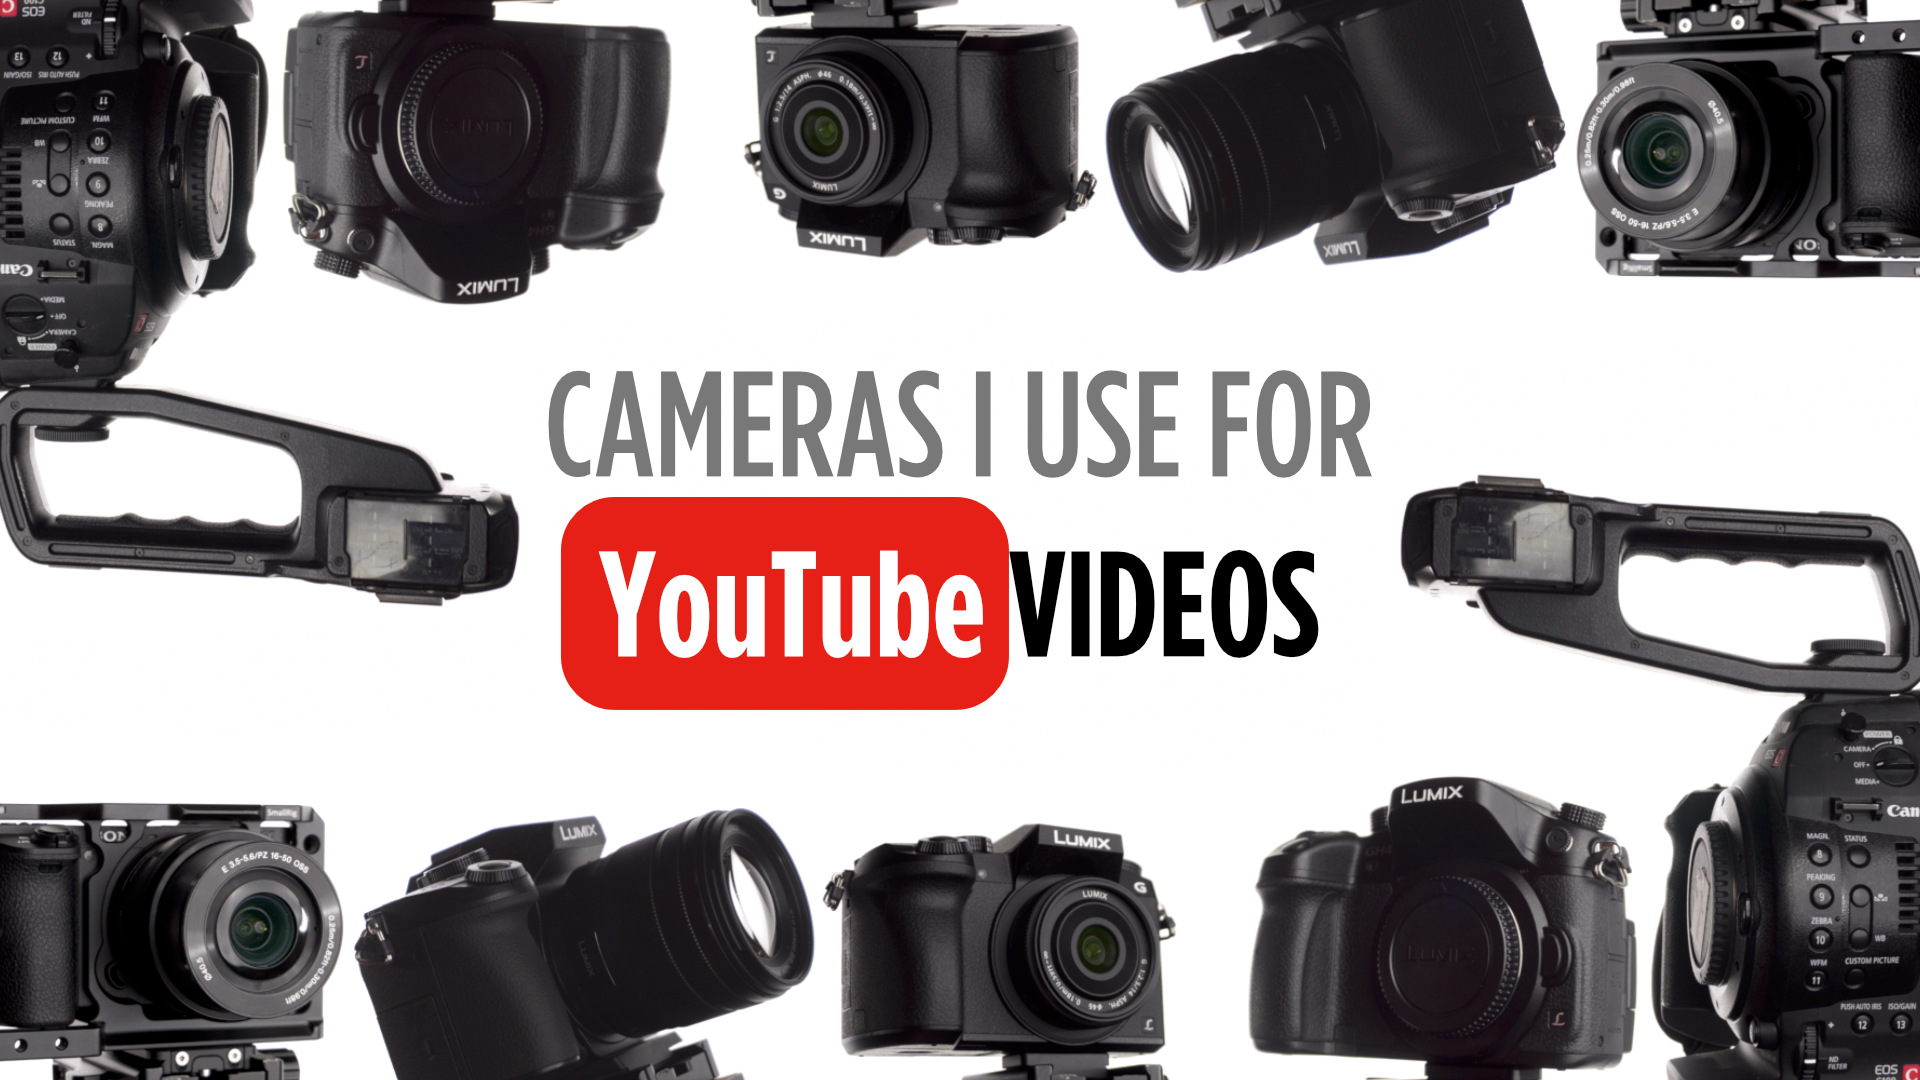 Cameras I Use for Making Youtube Videos